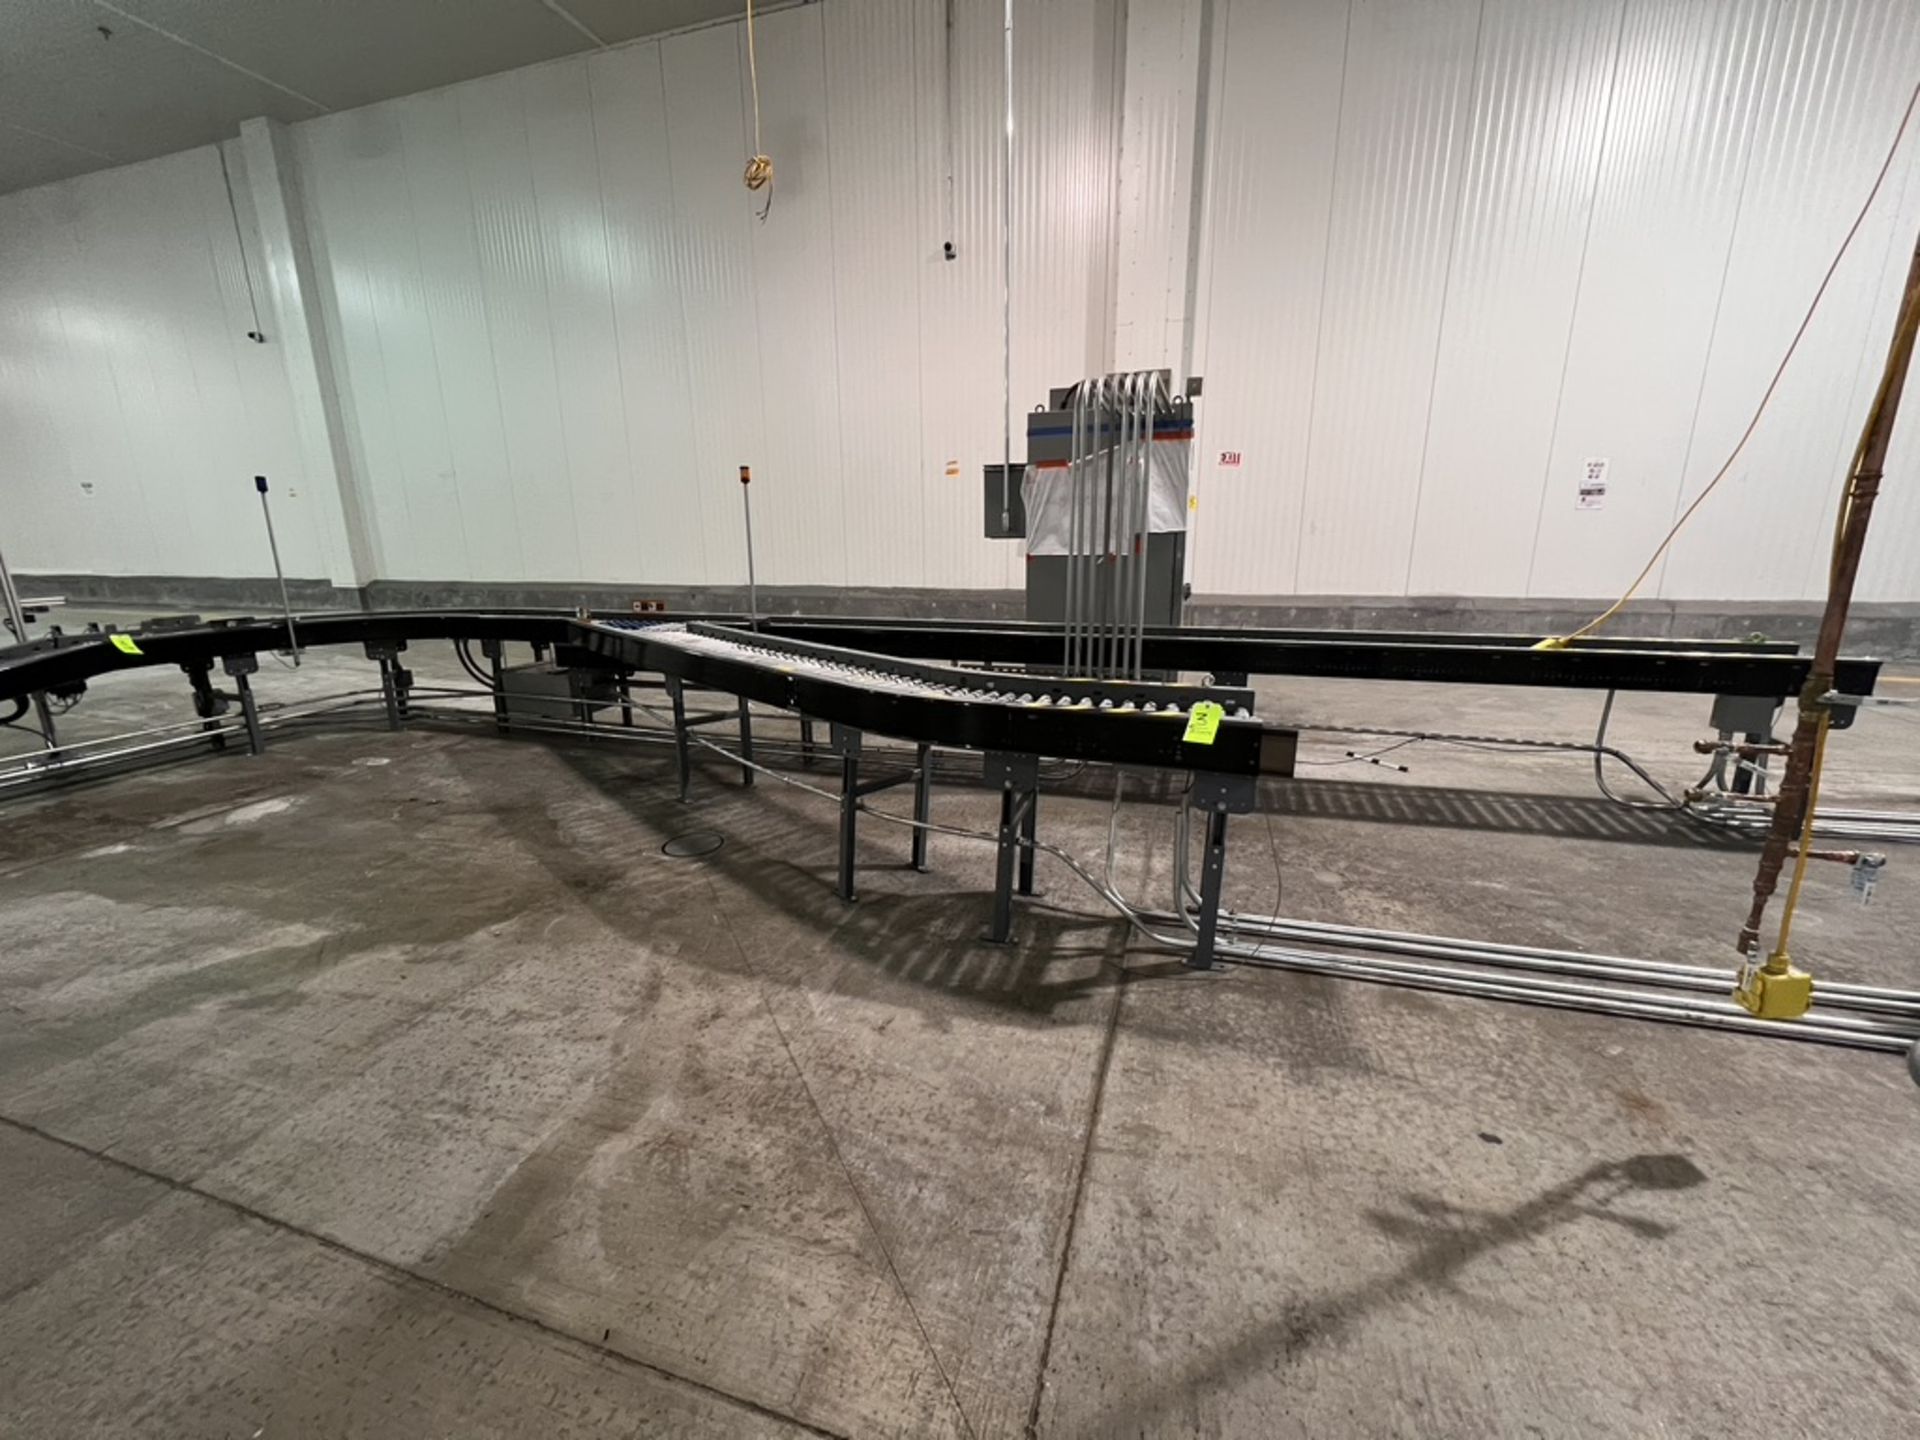 2020 HONEYWELL INTELLIGRATED ROLLER AND BELT POWER CONVEYOR, APPROX. 612 IN L X 15 IN W (SUBJECT